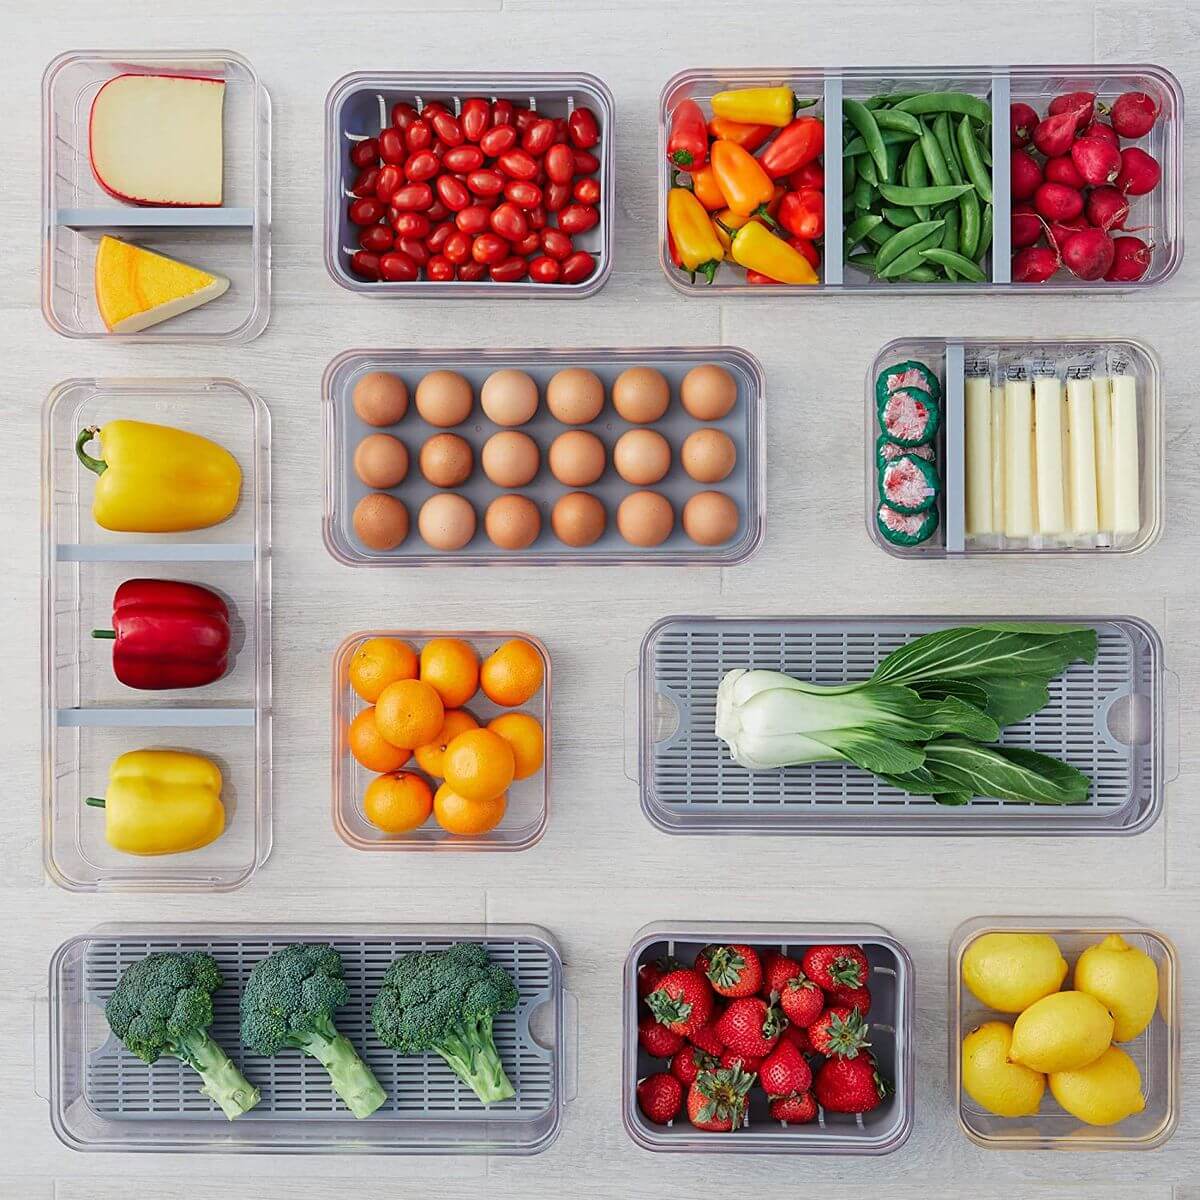 iDesign kitchen containers organising fresh produce